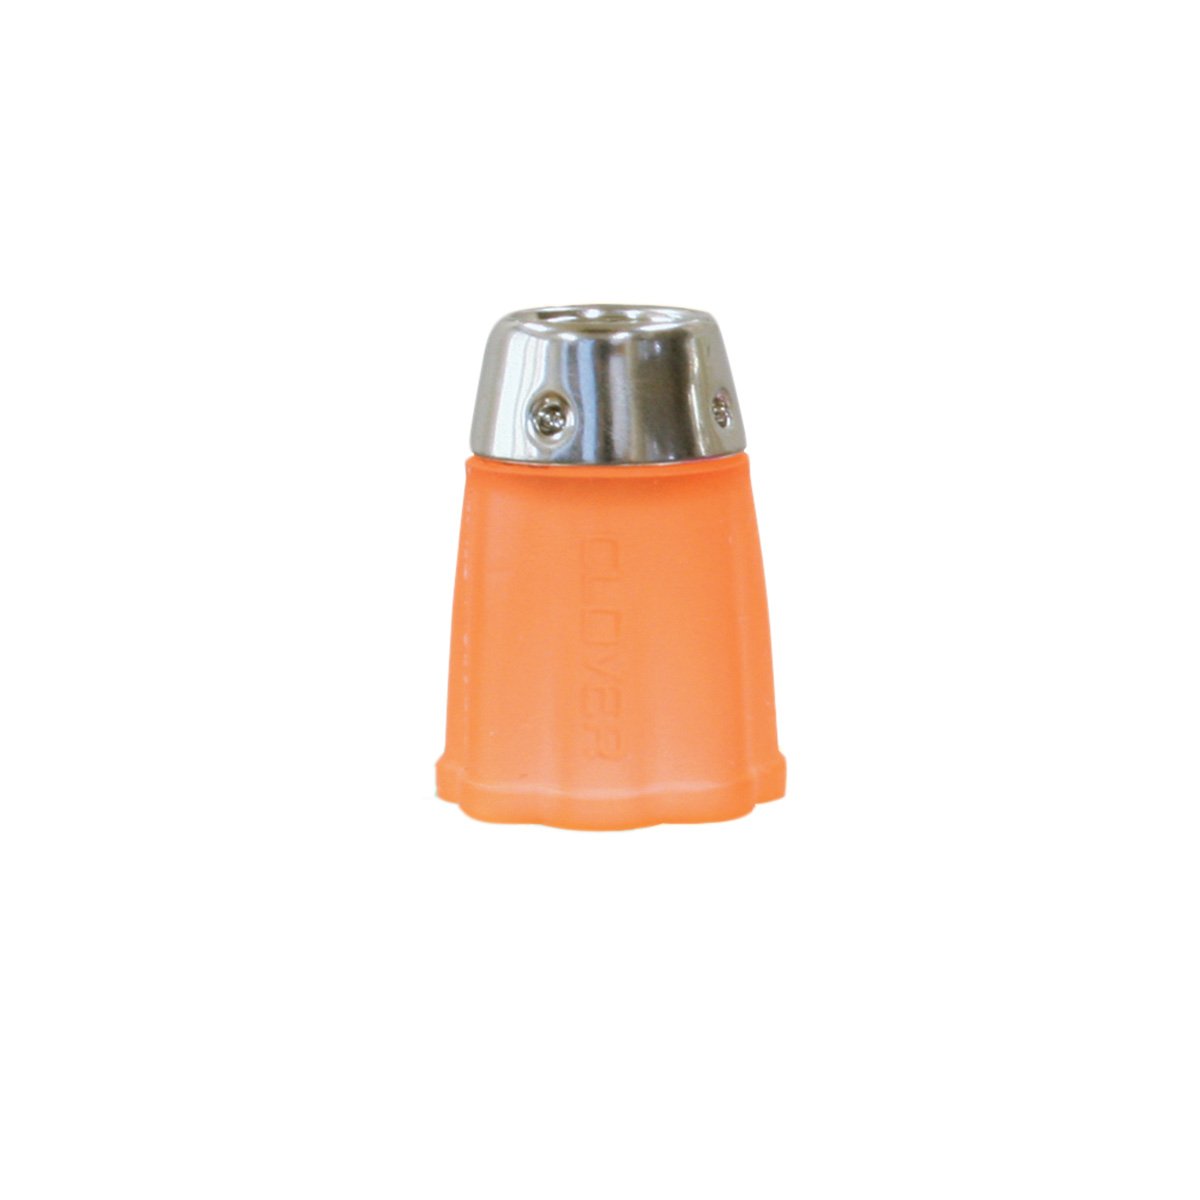 CLV - Protect and Grip Thimble - Small - 0